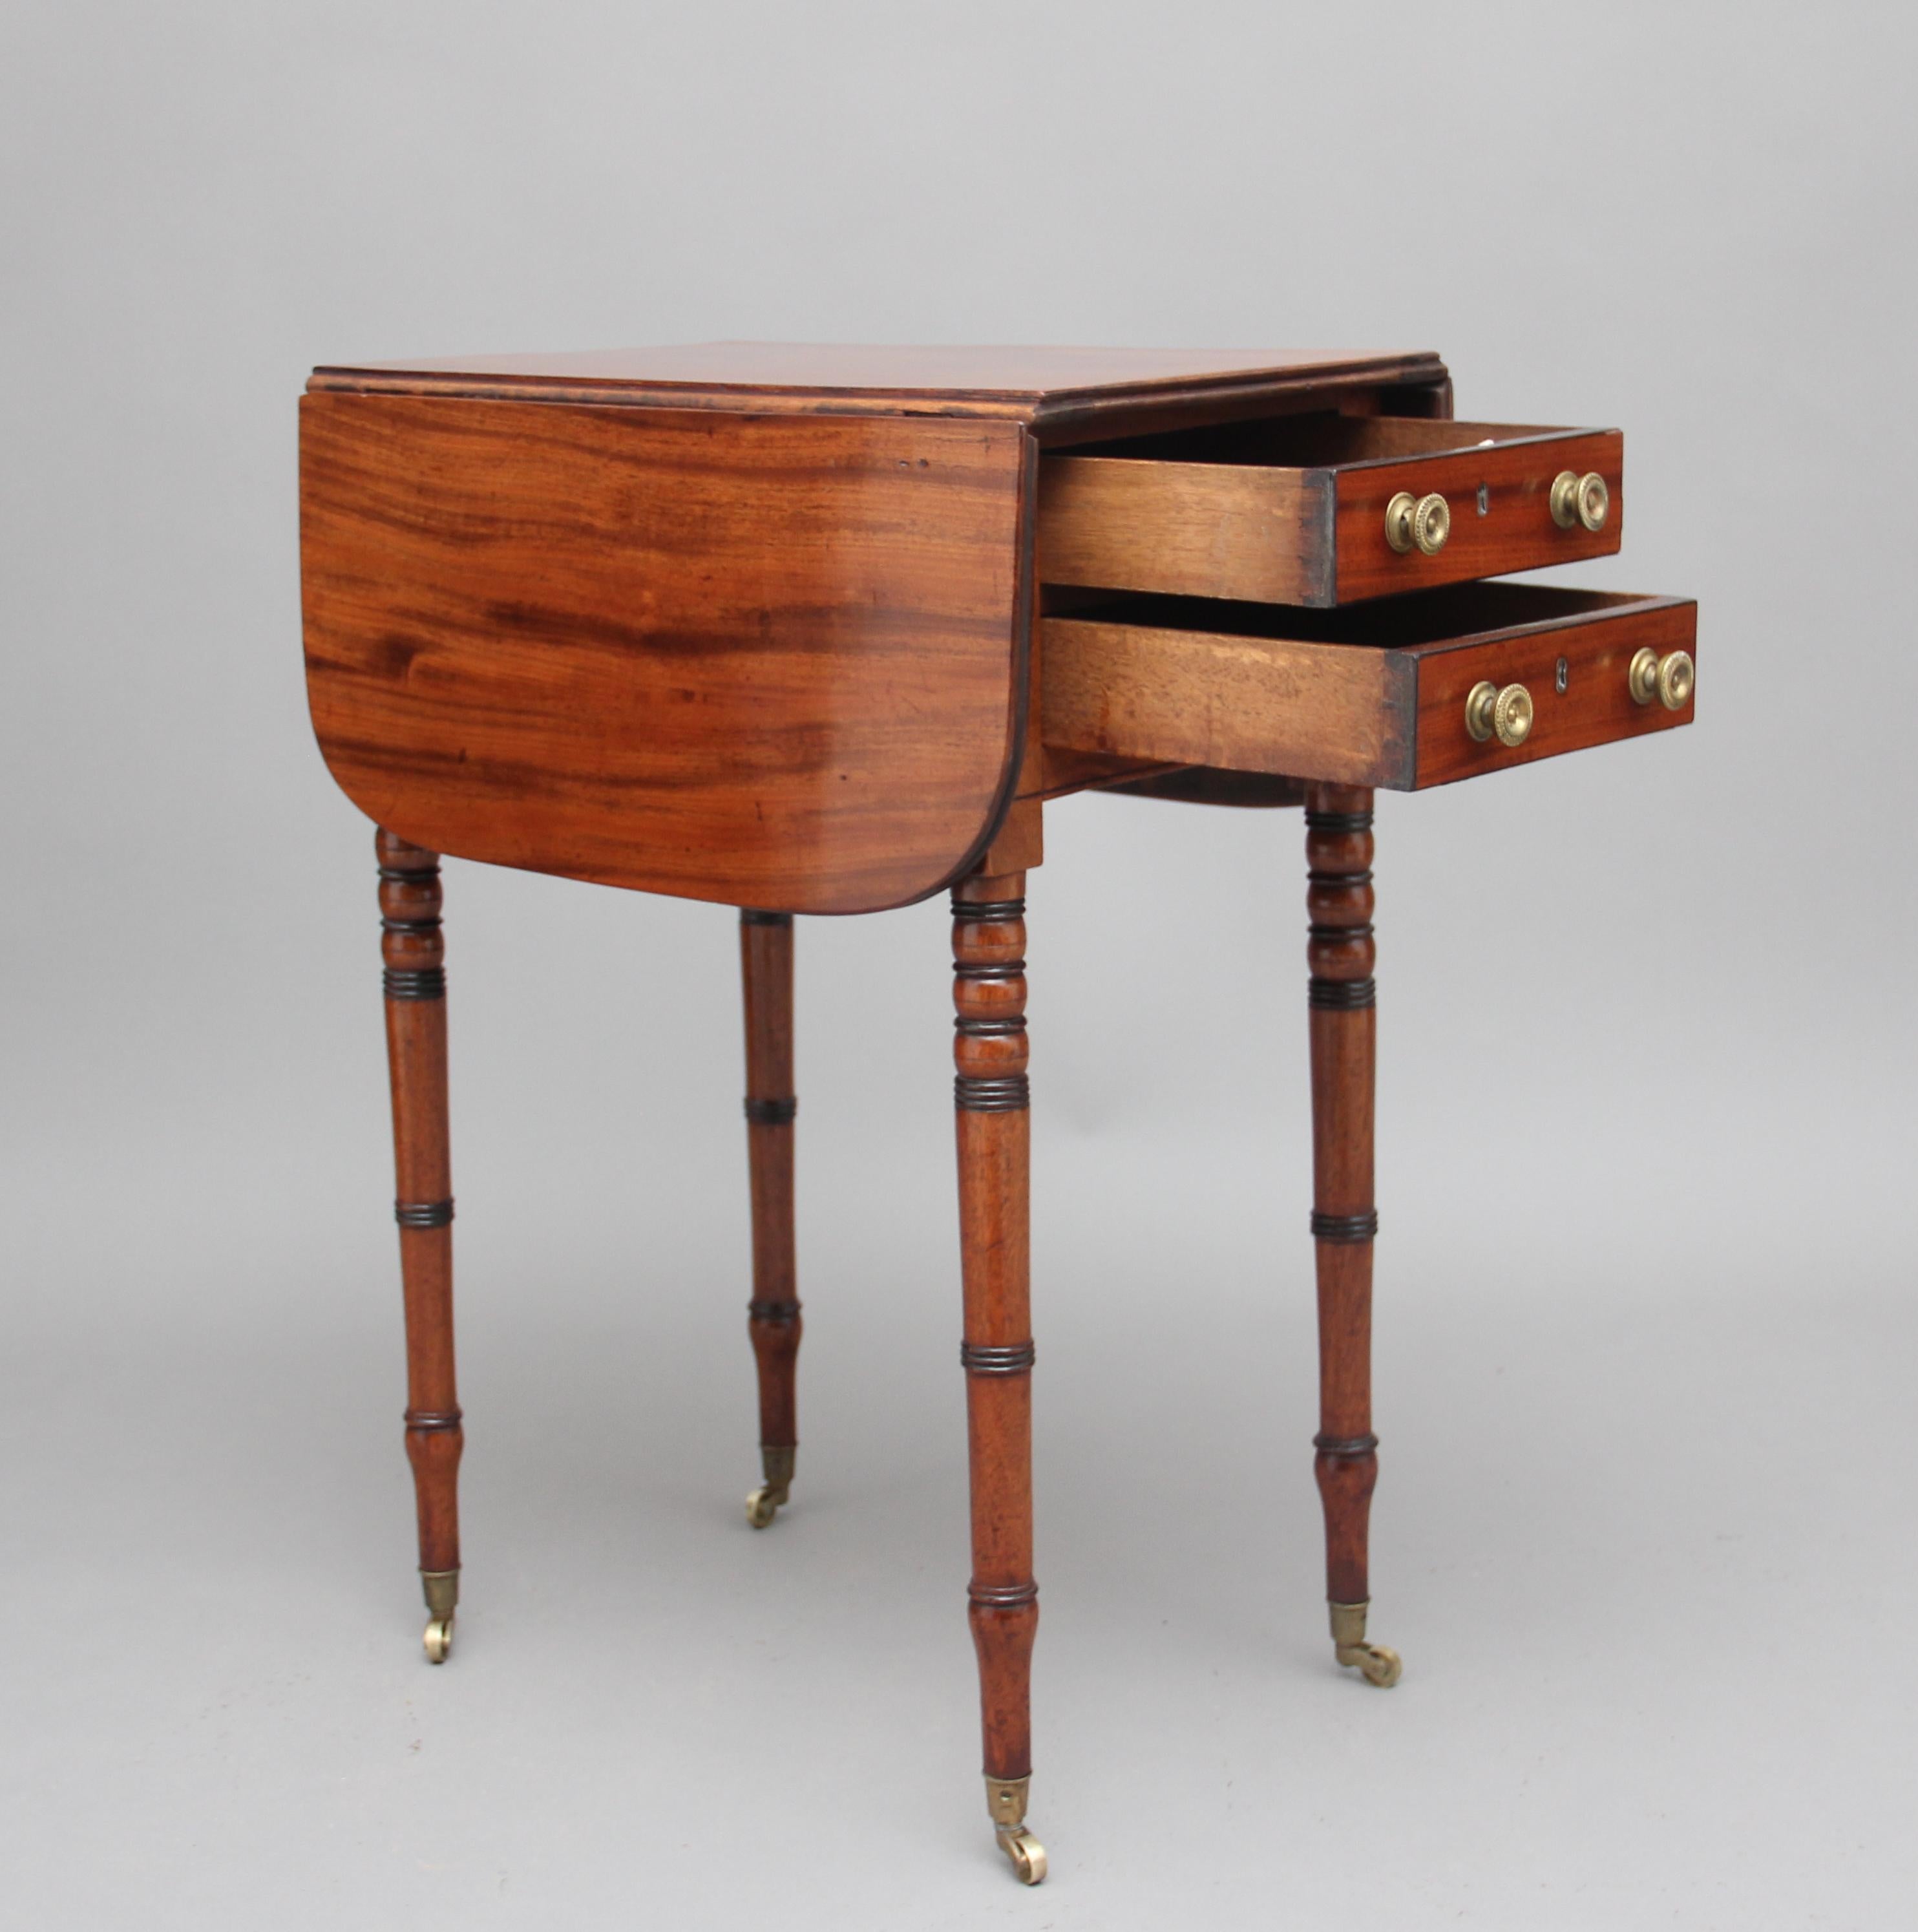 19th century mahogany drop leaf or side table, the drop leaf opens up and extends to 30” (76cms) having two oak lined drawers with original brass turned knob handles, the same on the reverse but with faux drawers, standing on turned feet terminating